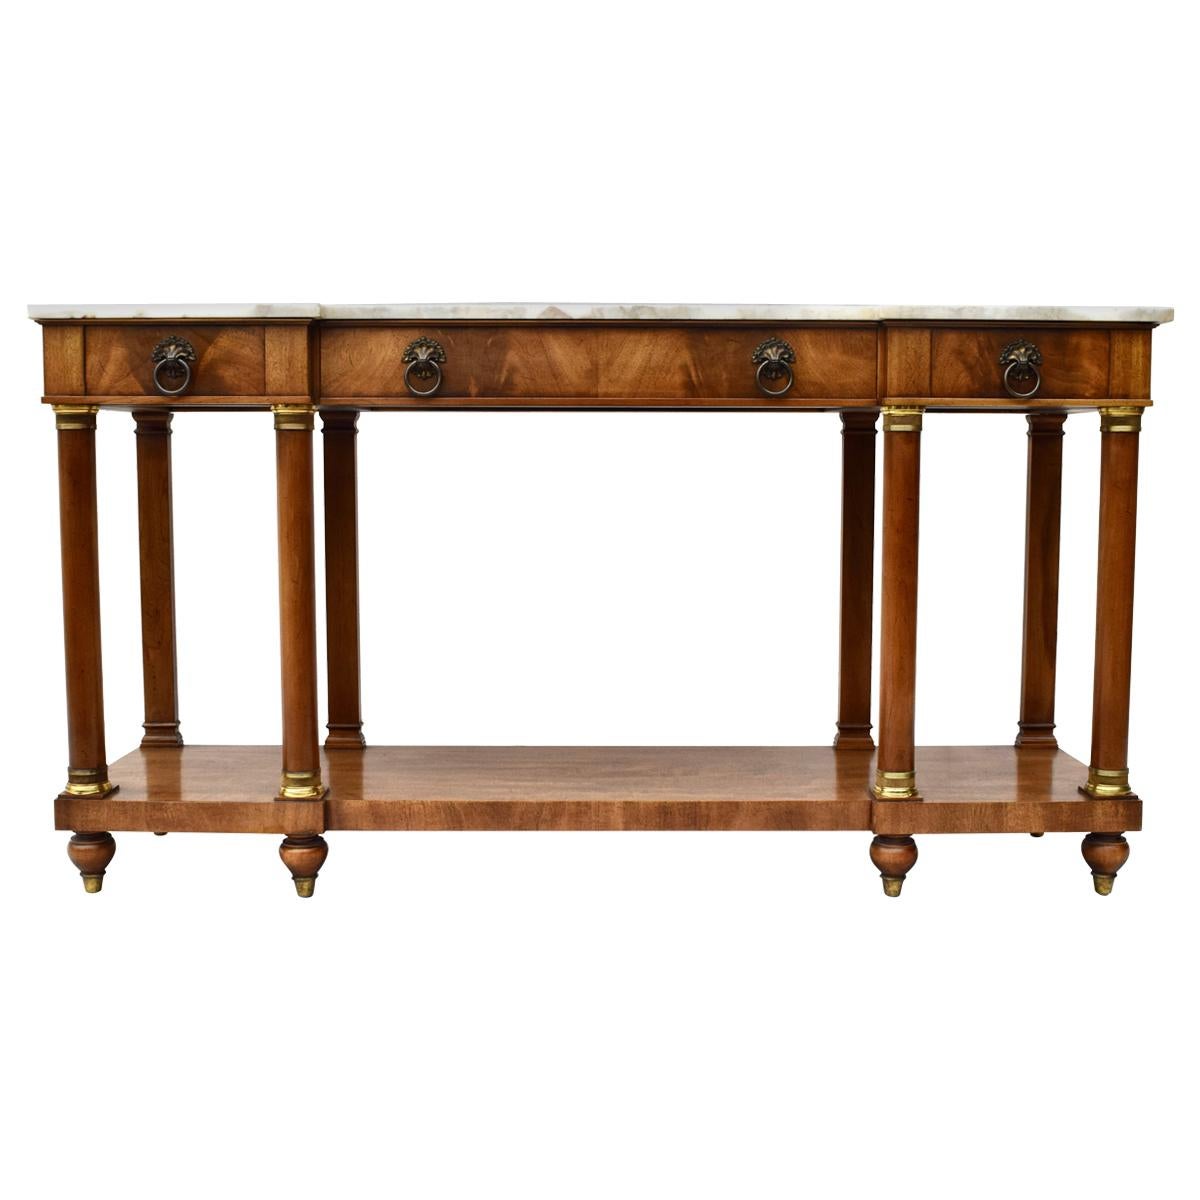 John Widdicomb French Neoclassical Style Server or Console Table